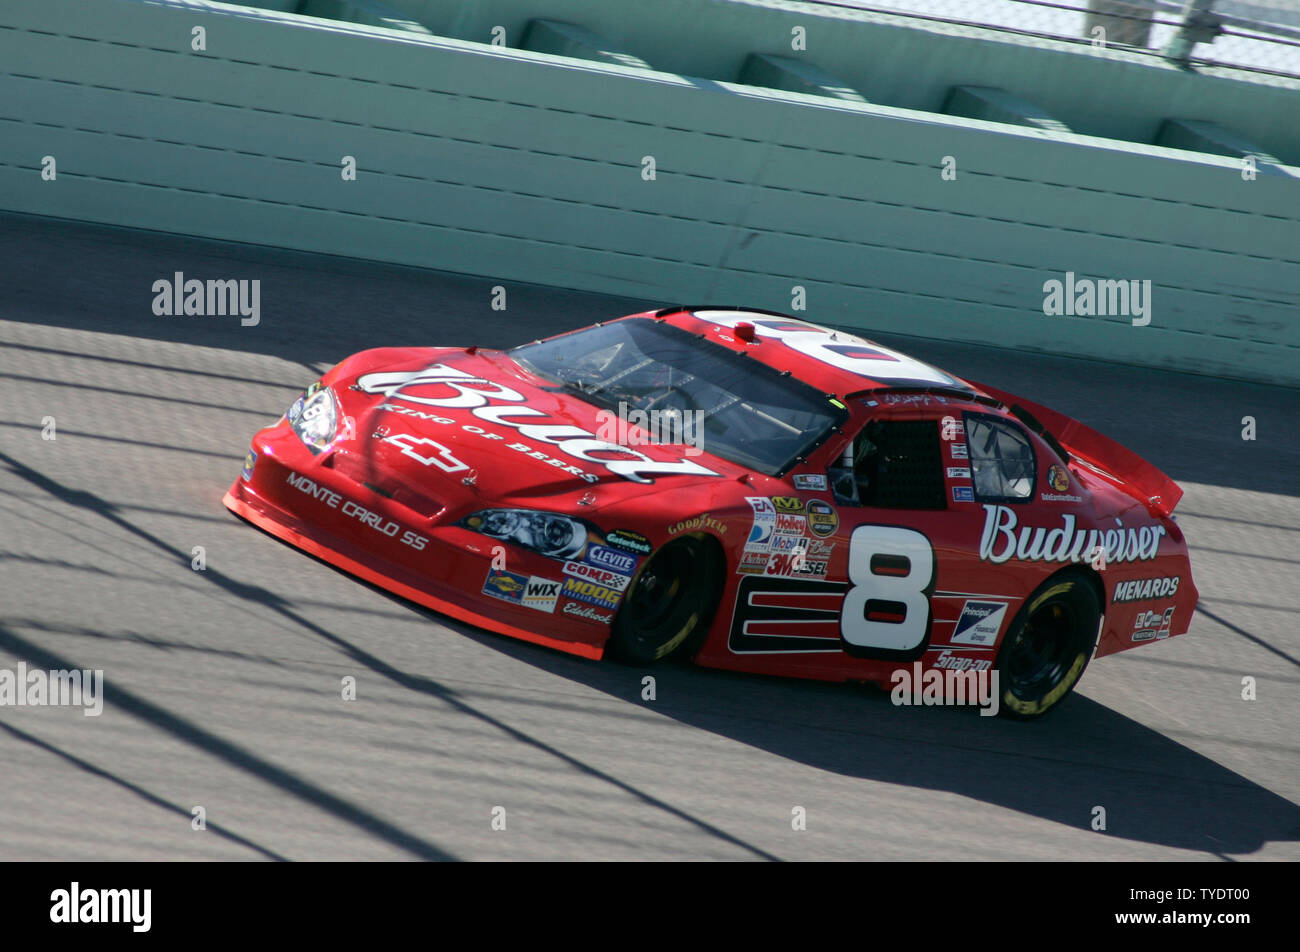 Dale Earnhardt Jr runs in the Nextel Cup practice at Homestead-Miami  Speedway in Homestead, Florida on November 16, 2007. This will be  Earnhardt's last race for his late fathers racing team. (UPI